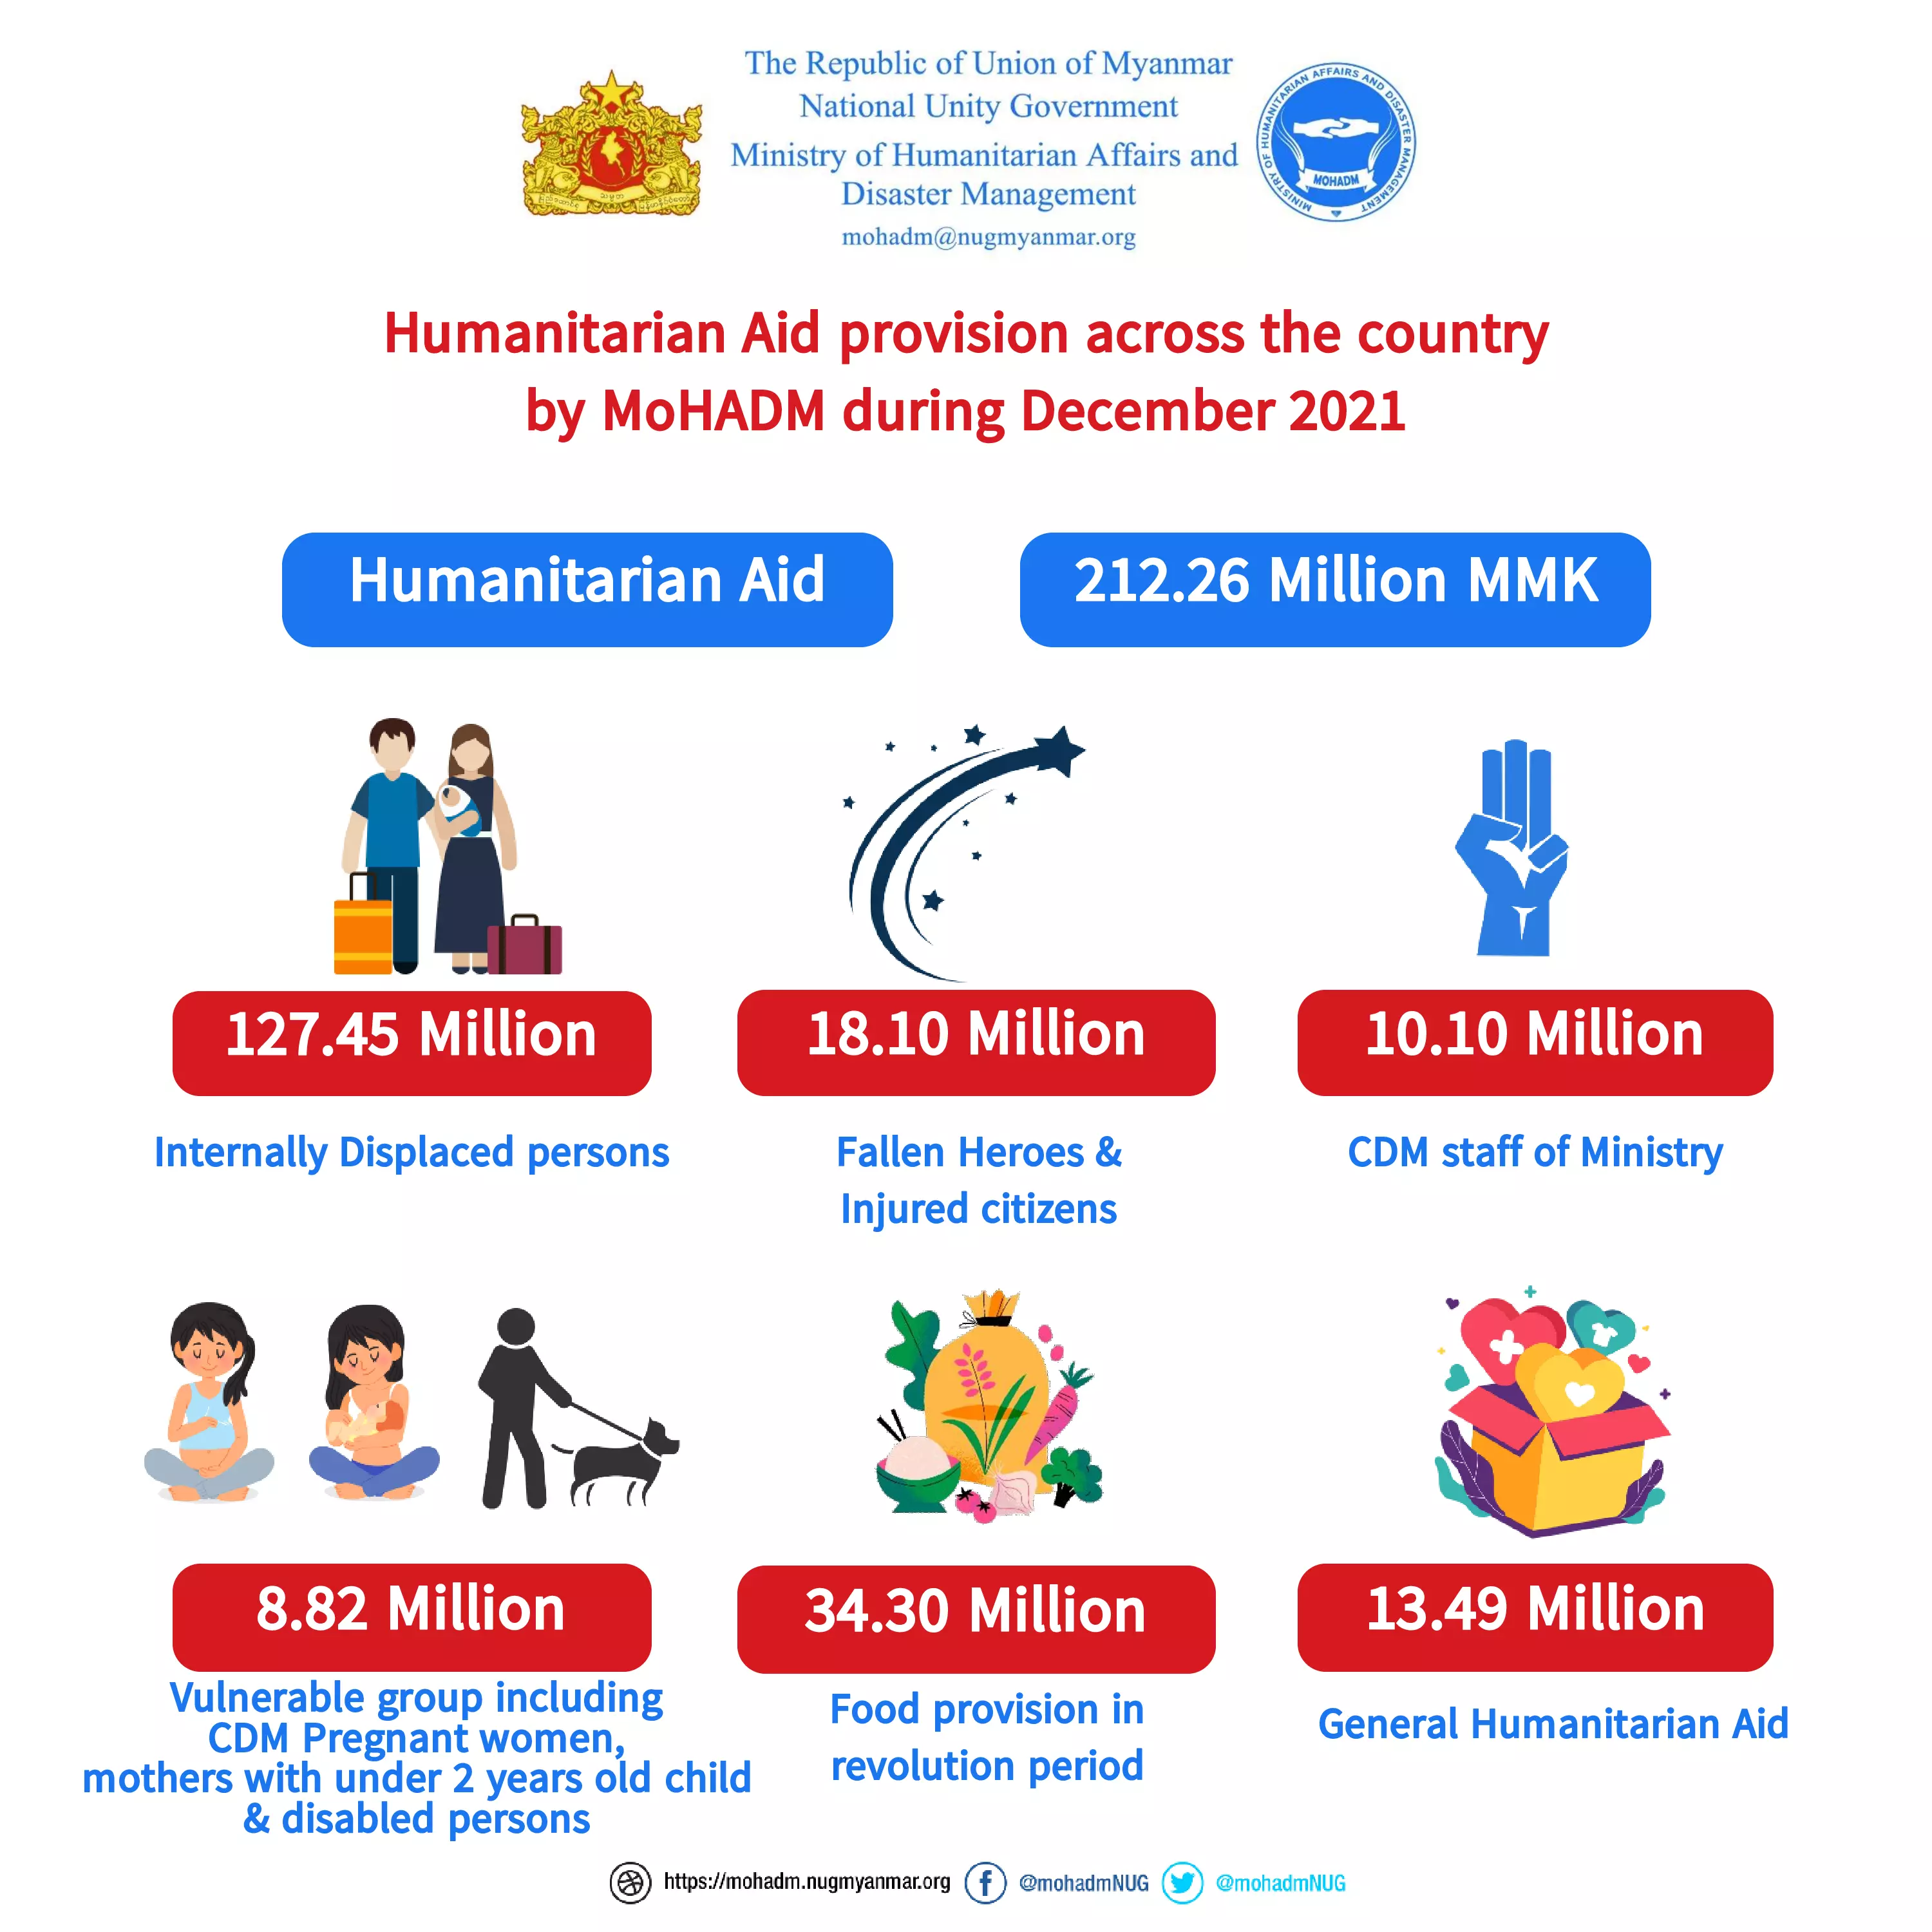 Humanitarian aid provision by MoHADM across the country during December 2021